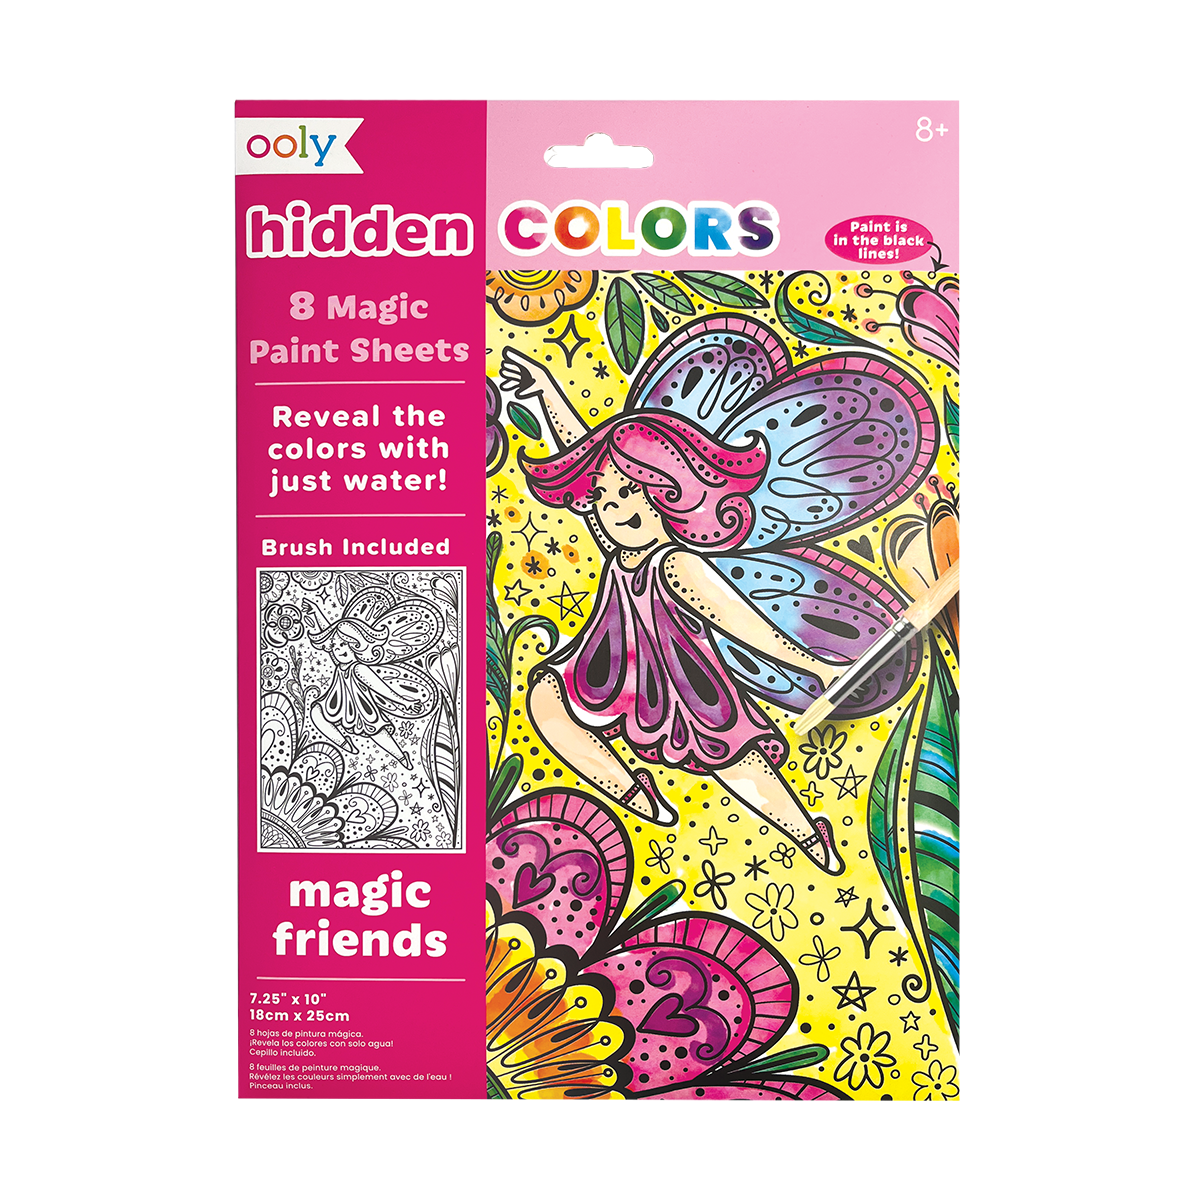 OOLY Hidden Colors Magic Paint Sheets - Magic Friends in package